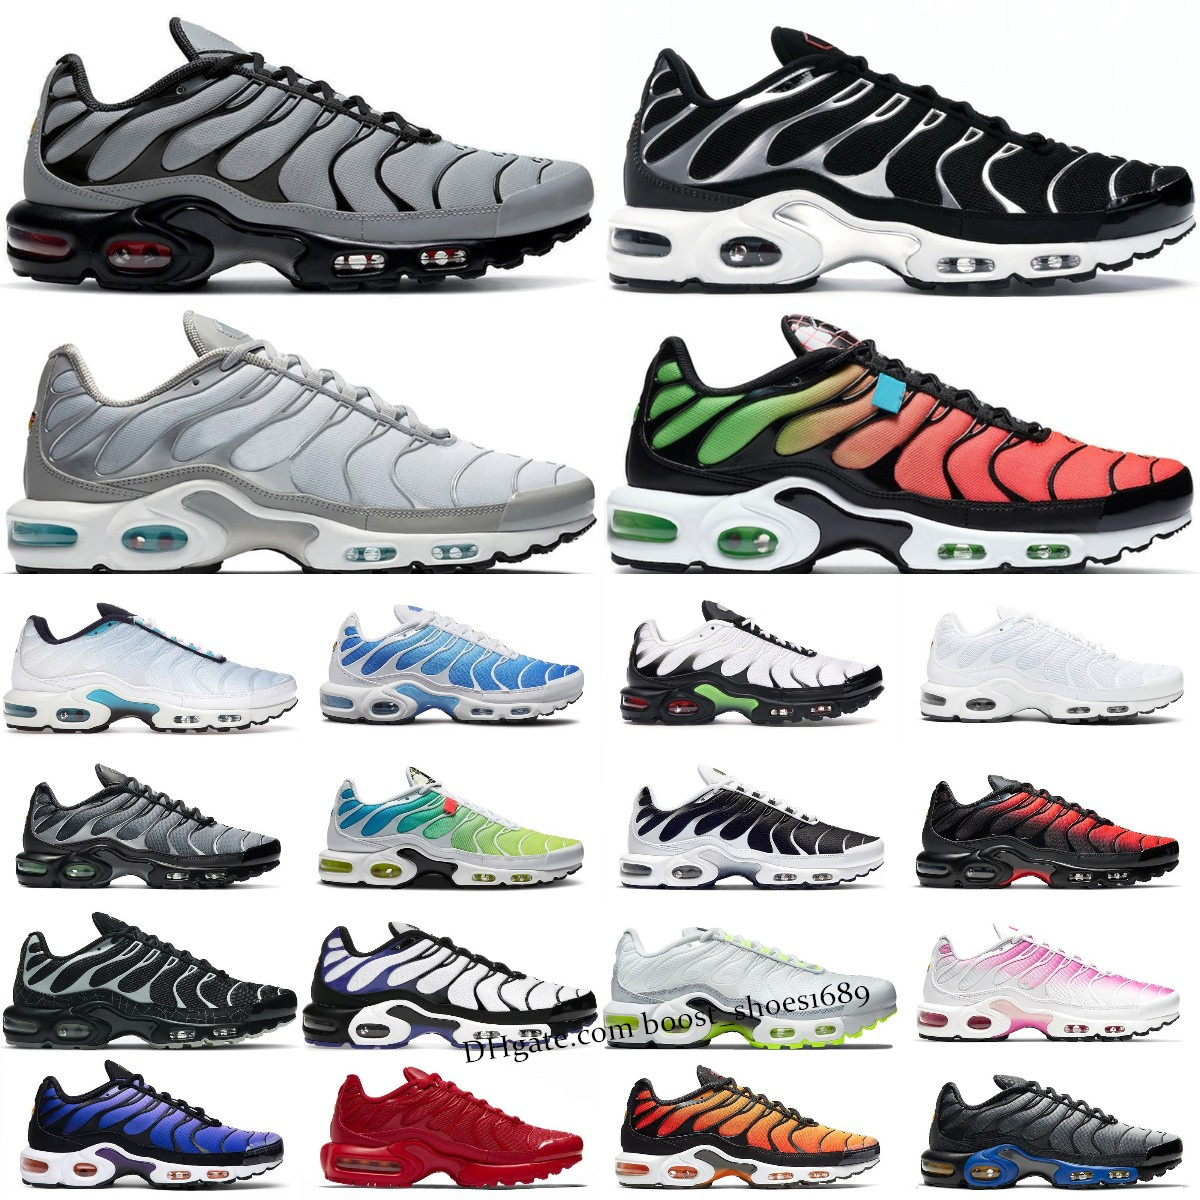 tn plus mens trainers tns running shoes white Black Anthracite Blue Red Dusk Atlanta University Gold Bullet women Breathable sneakers sports tennis 36-46